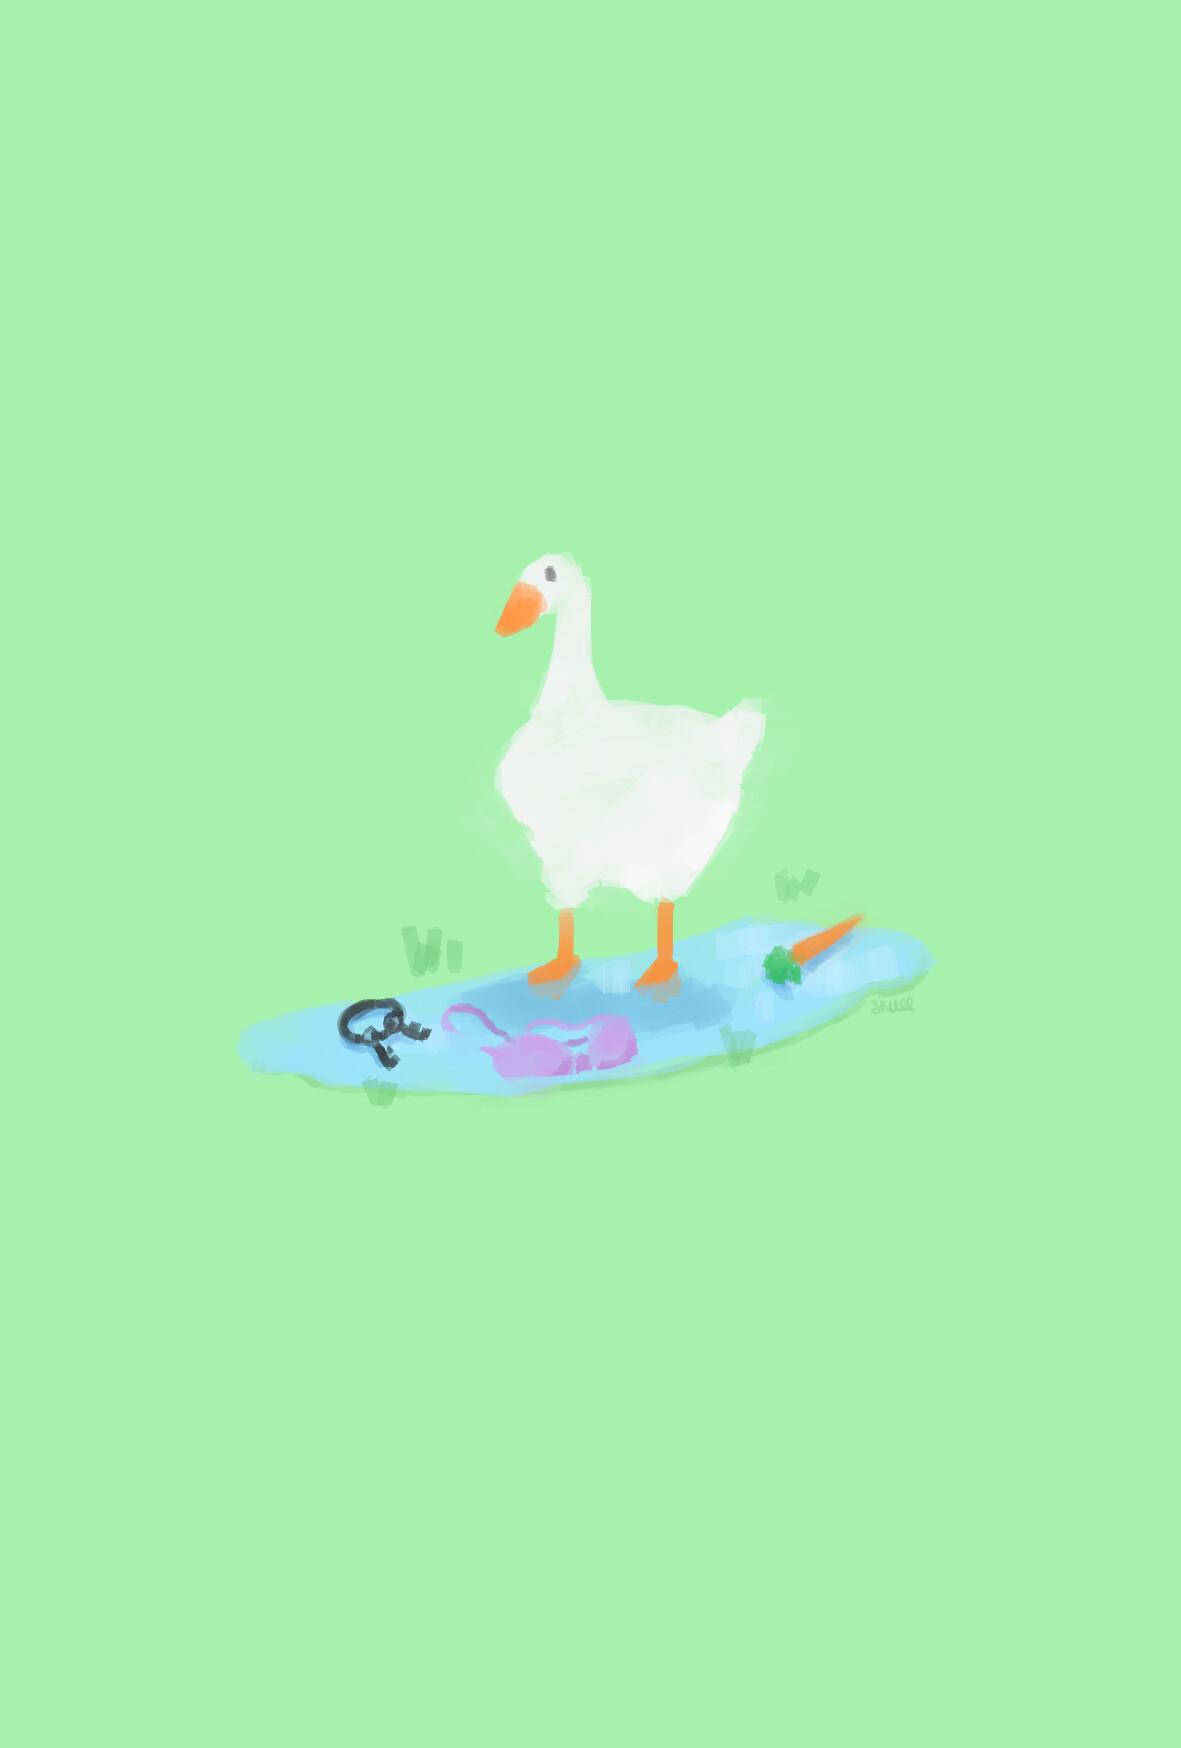 Untitled Goose Game Mobile Wallpapers - Top Free Untitled Goose Game ...